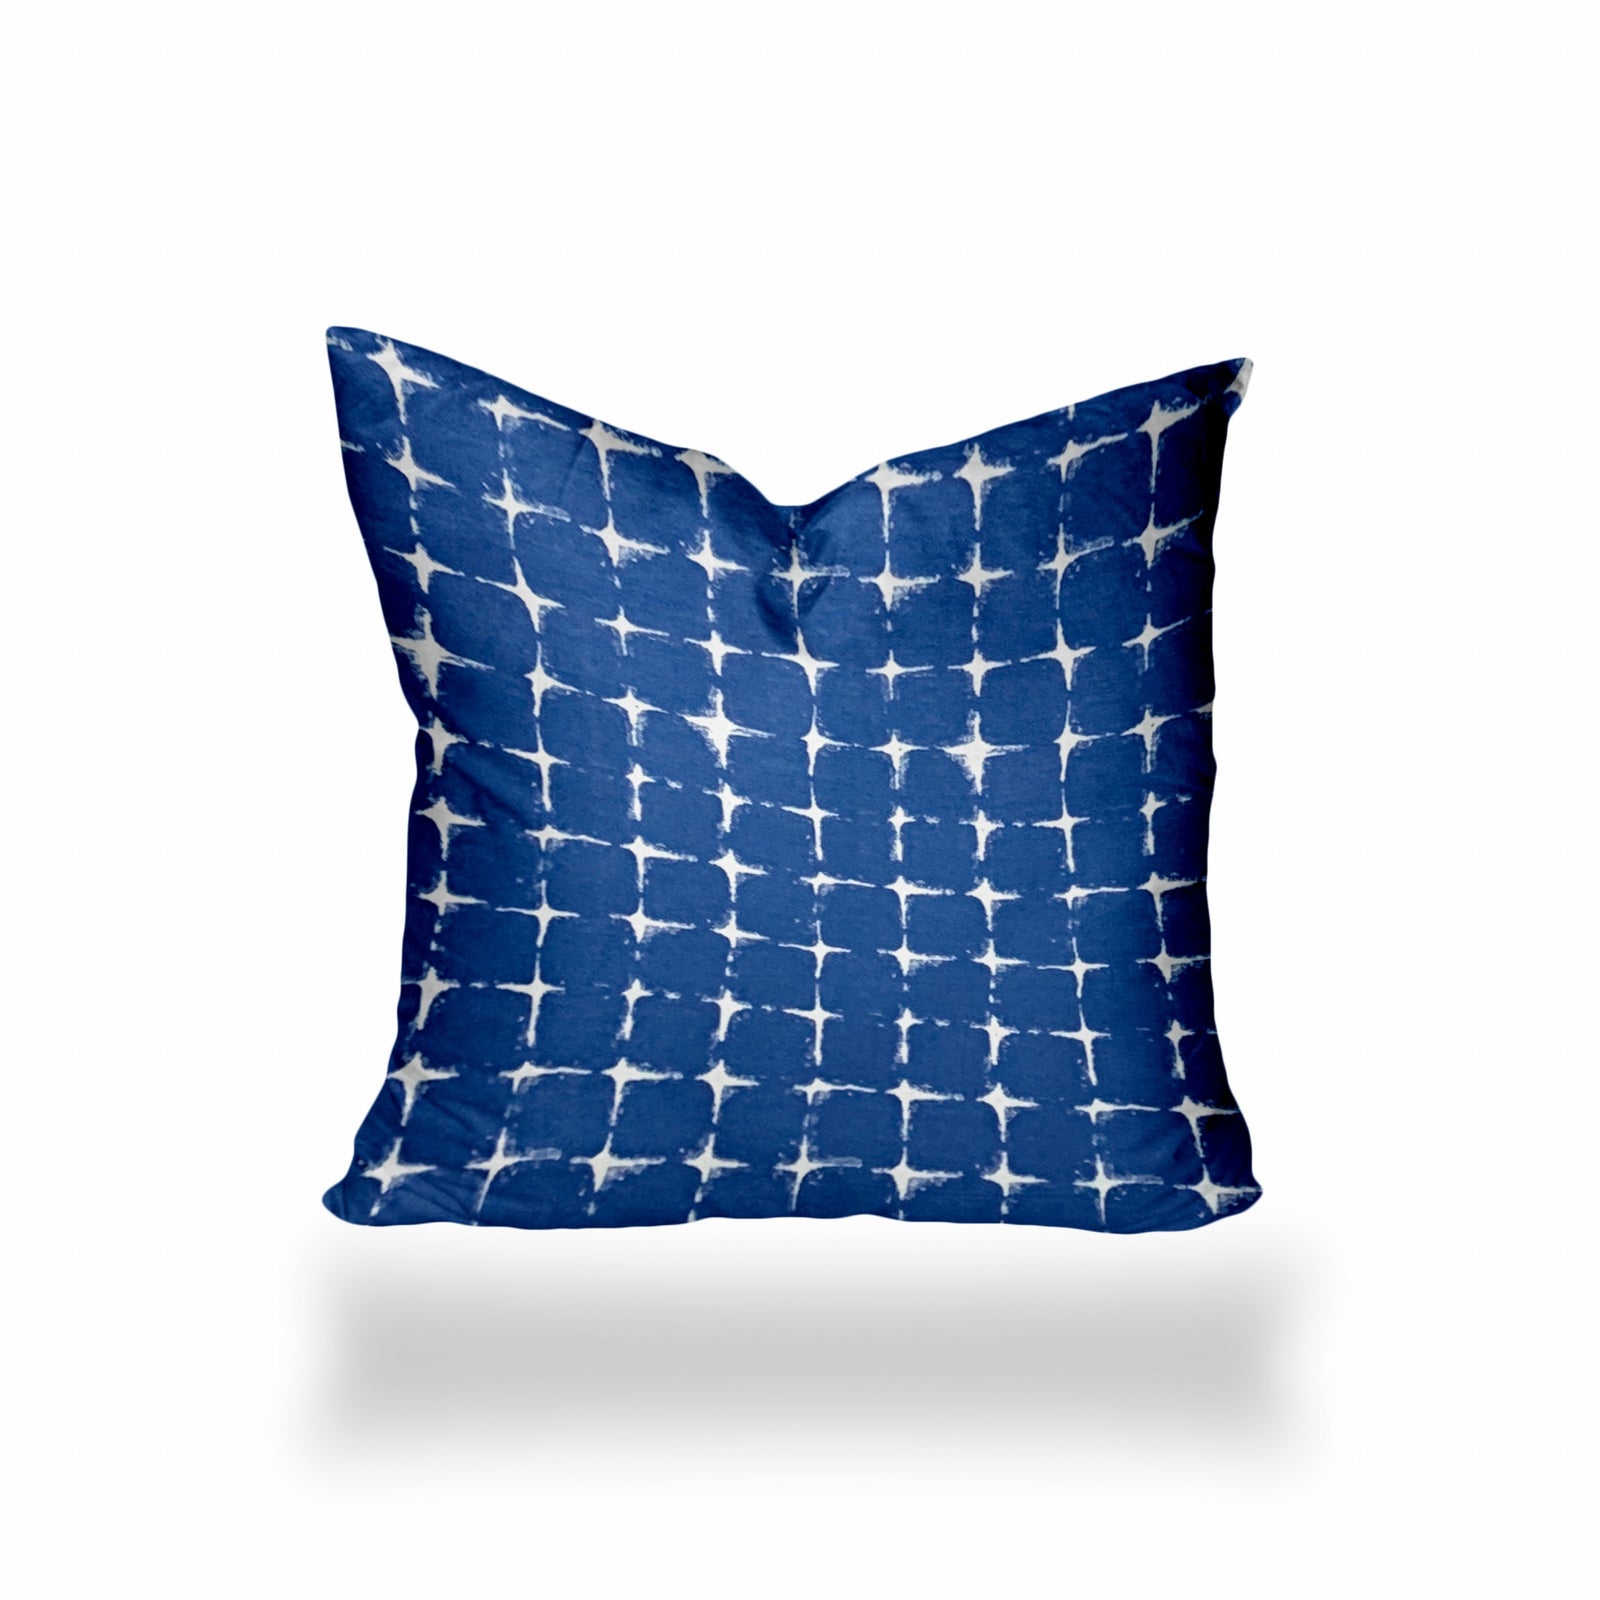 14" X 14" Blue And White Enveloped Gingham Throw Indoor Outdoor Pillow Cover